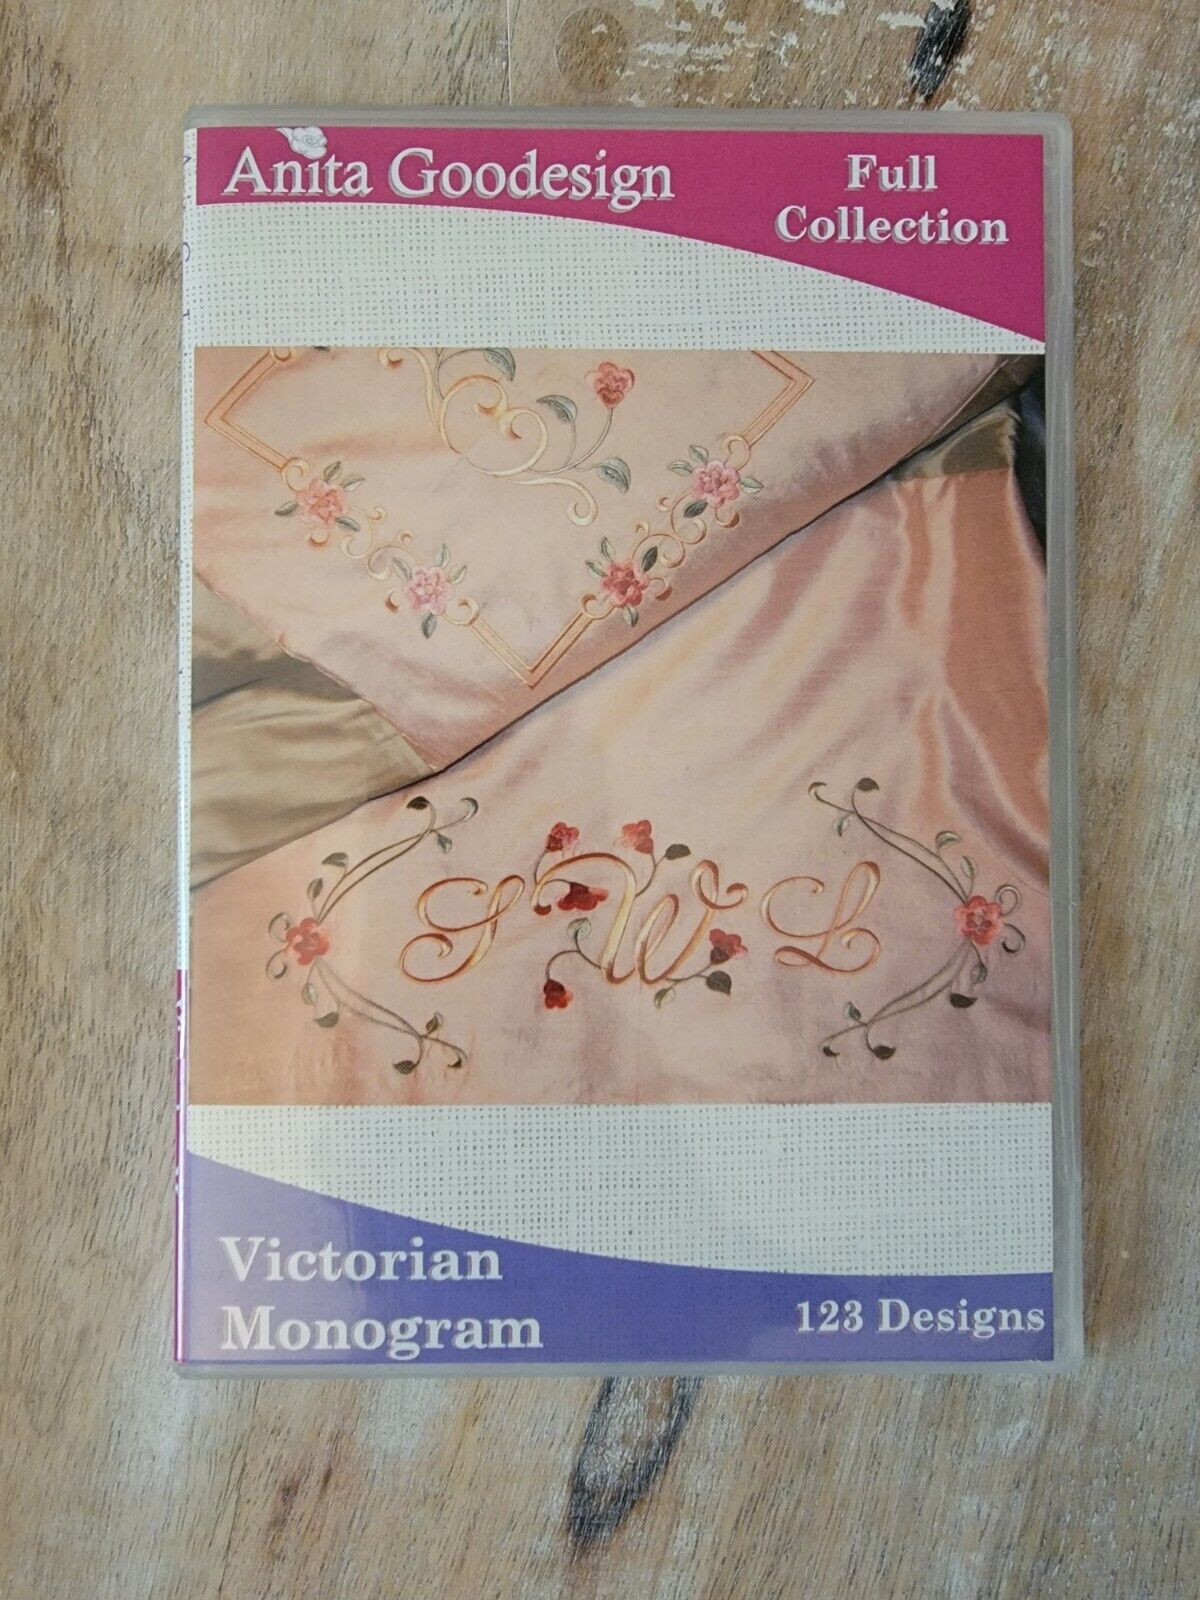 Victorian Monogram Anita Goodesign Quilting 123 Embroidery Designs CD Preowned